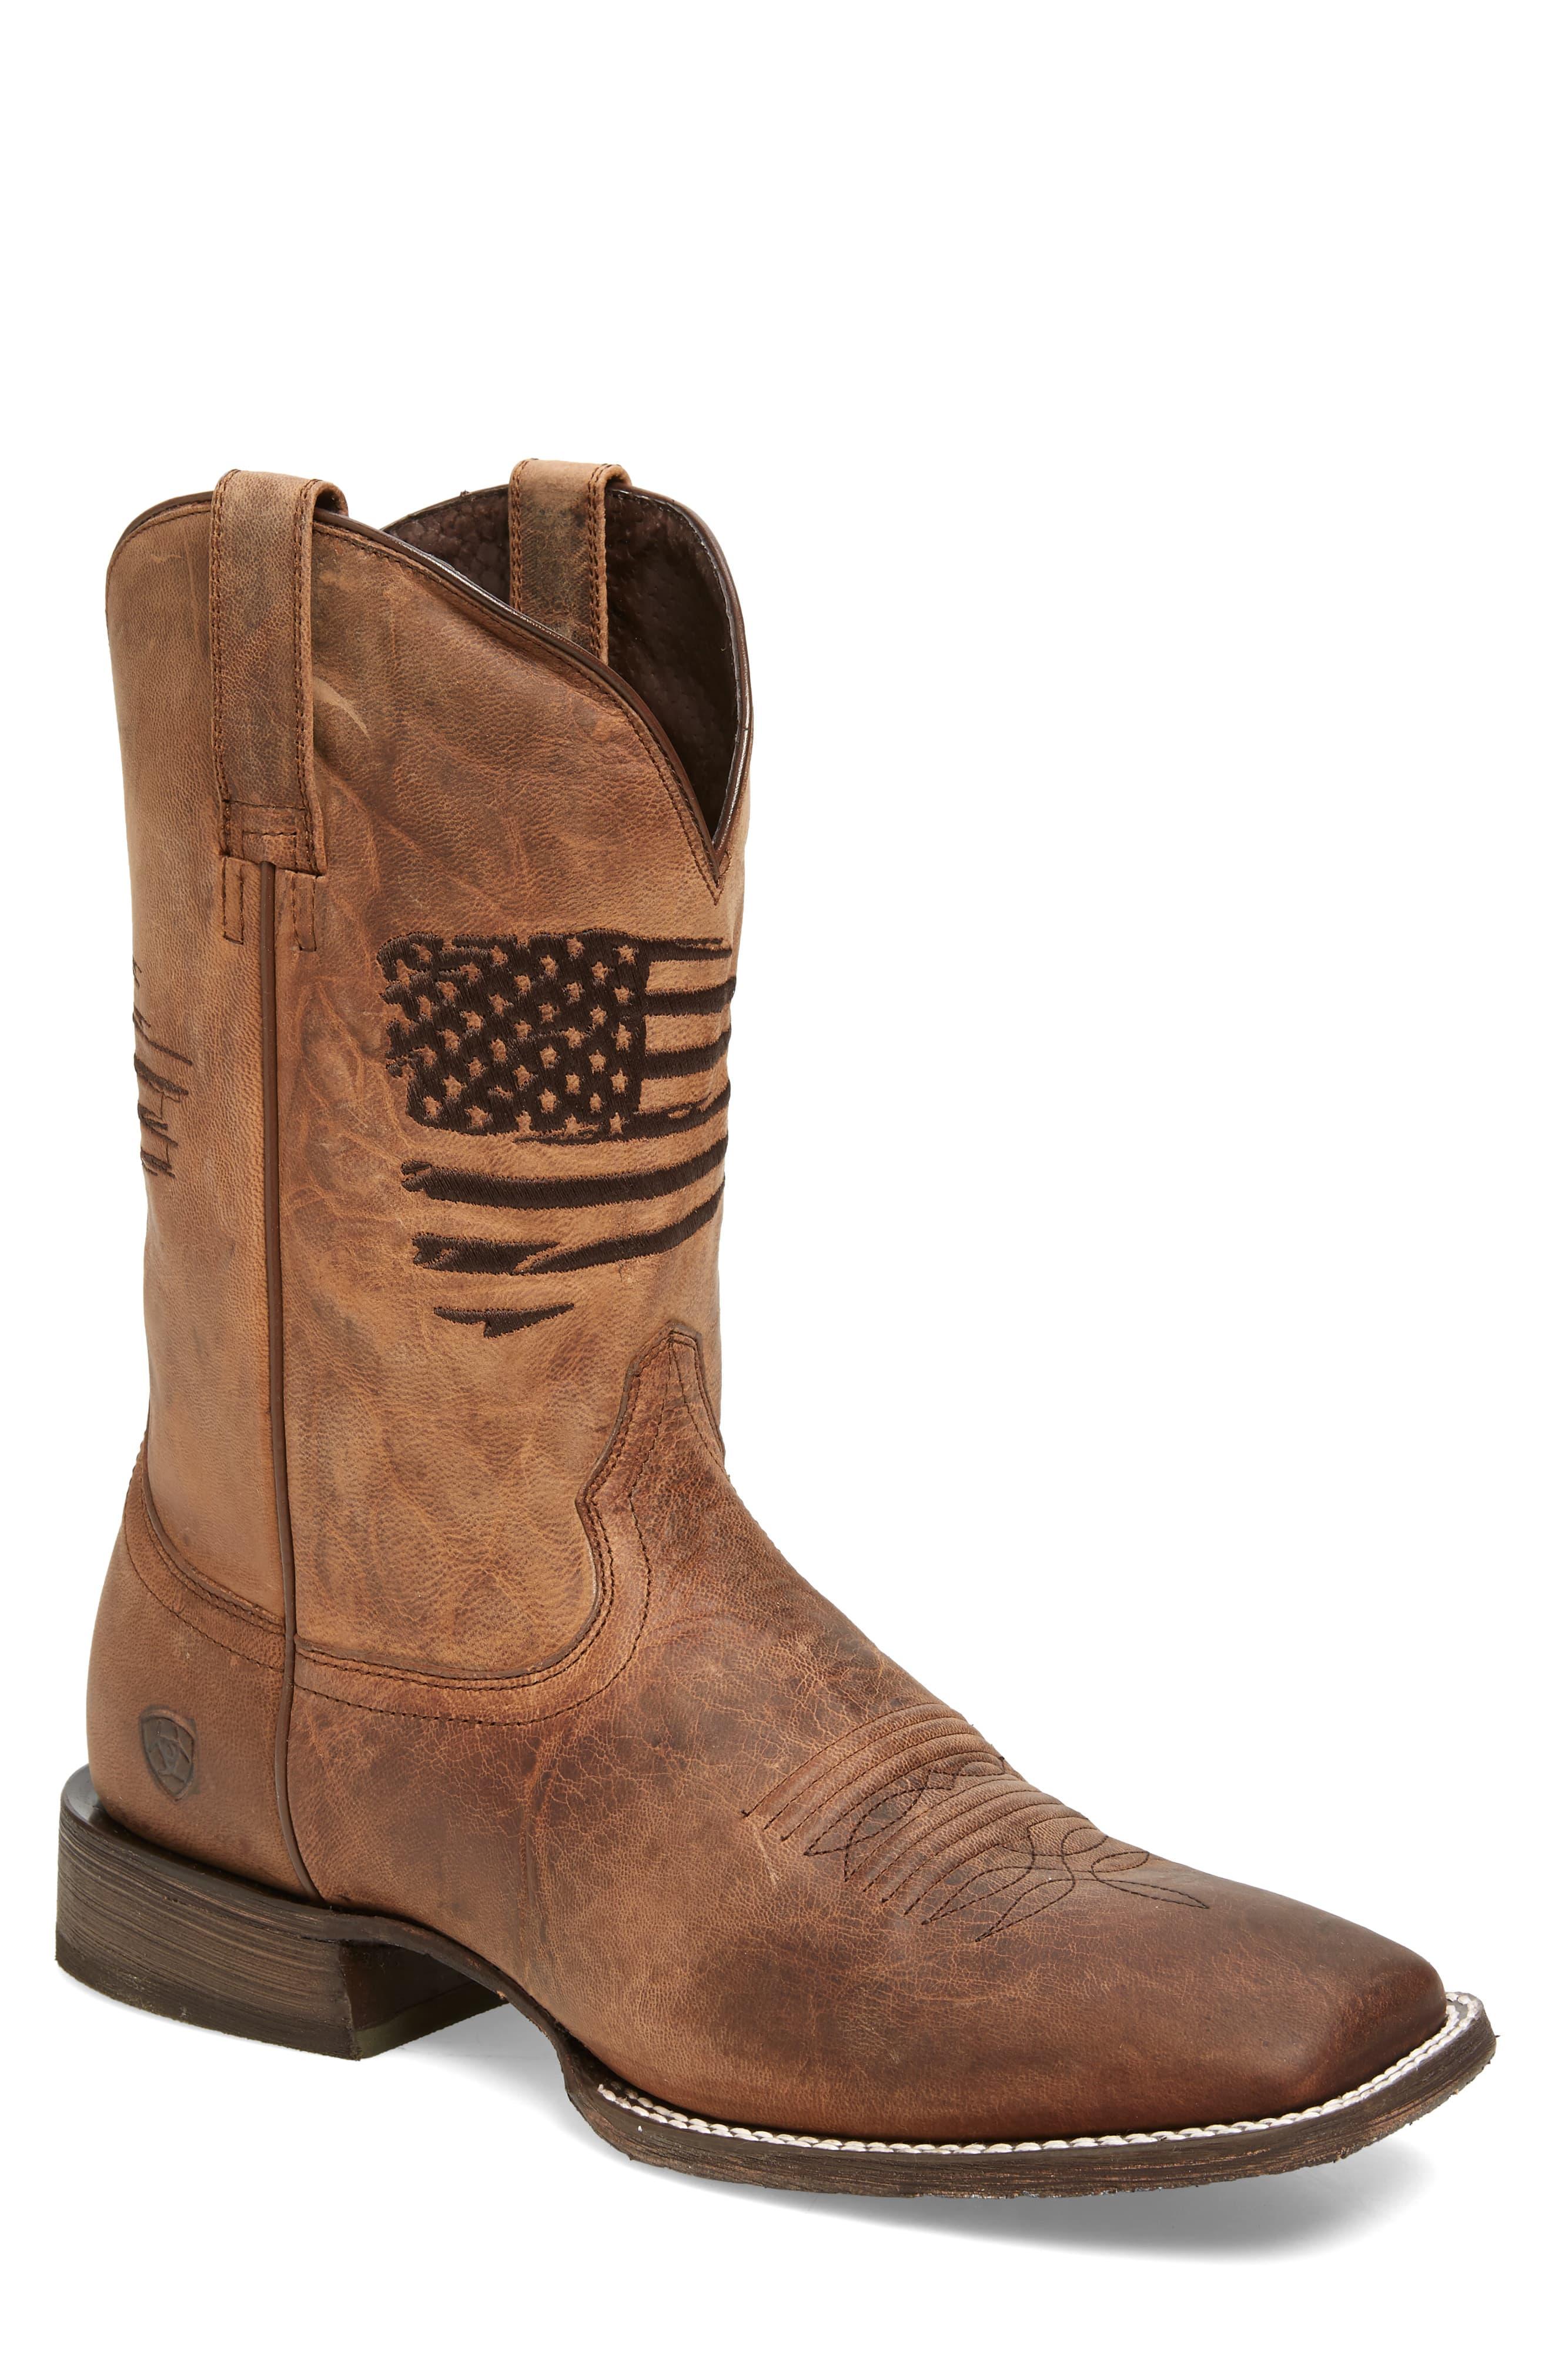 Ariat Leather Circuit Patriot Cowboy Boot in Brown for Men - Lyst